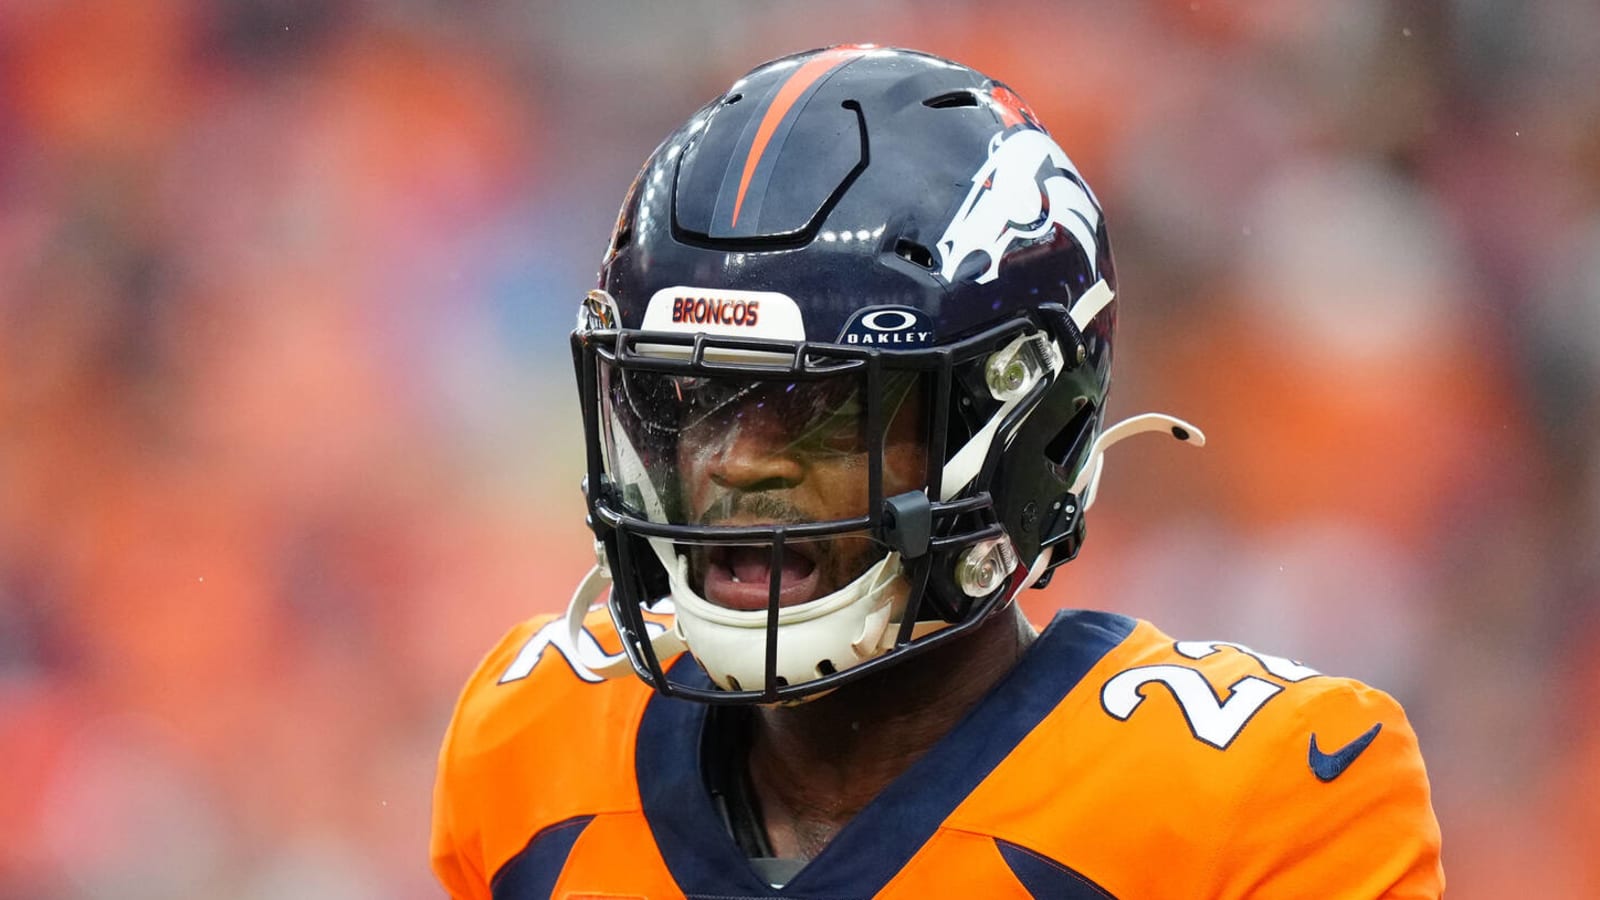 Watch: Broncos' Jackson ejected for another dirty hit